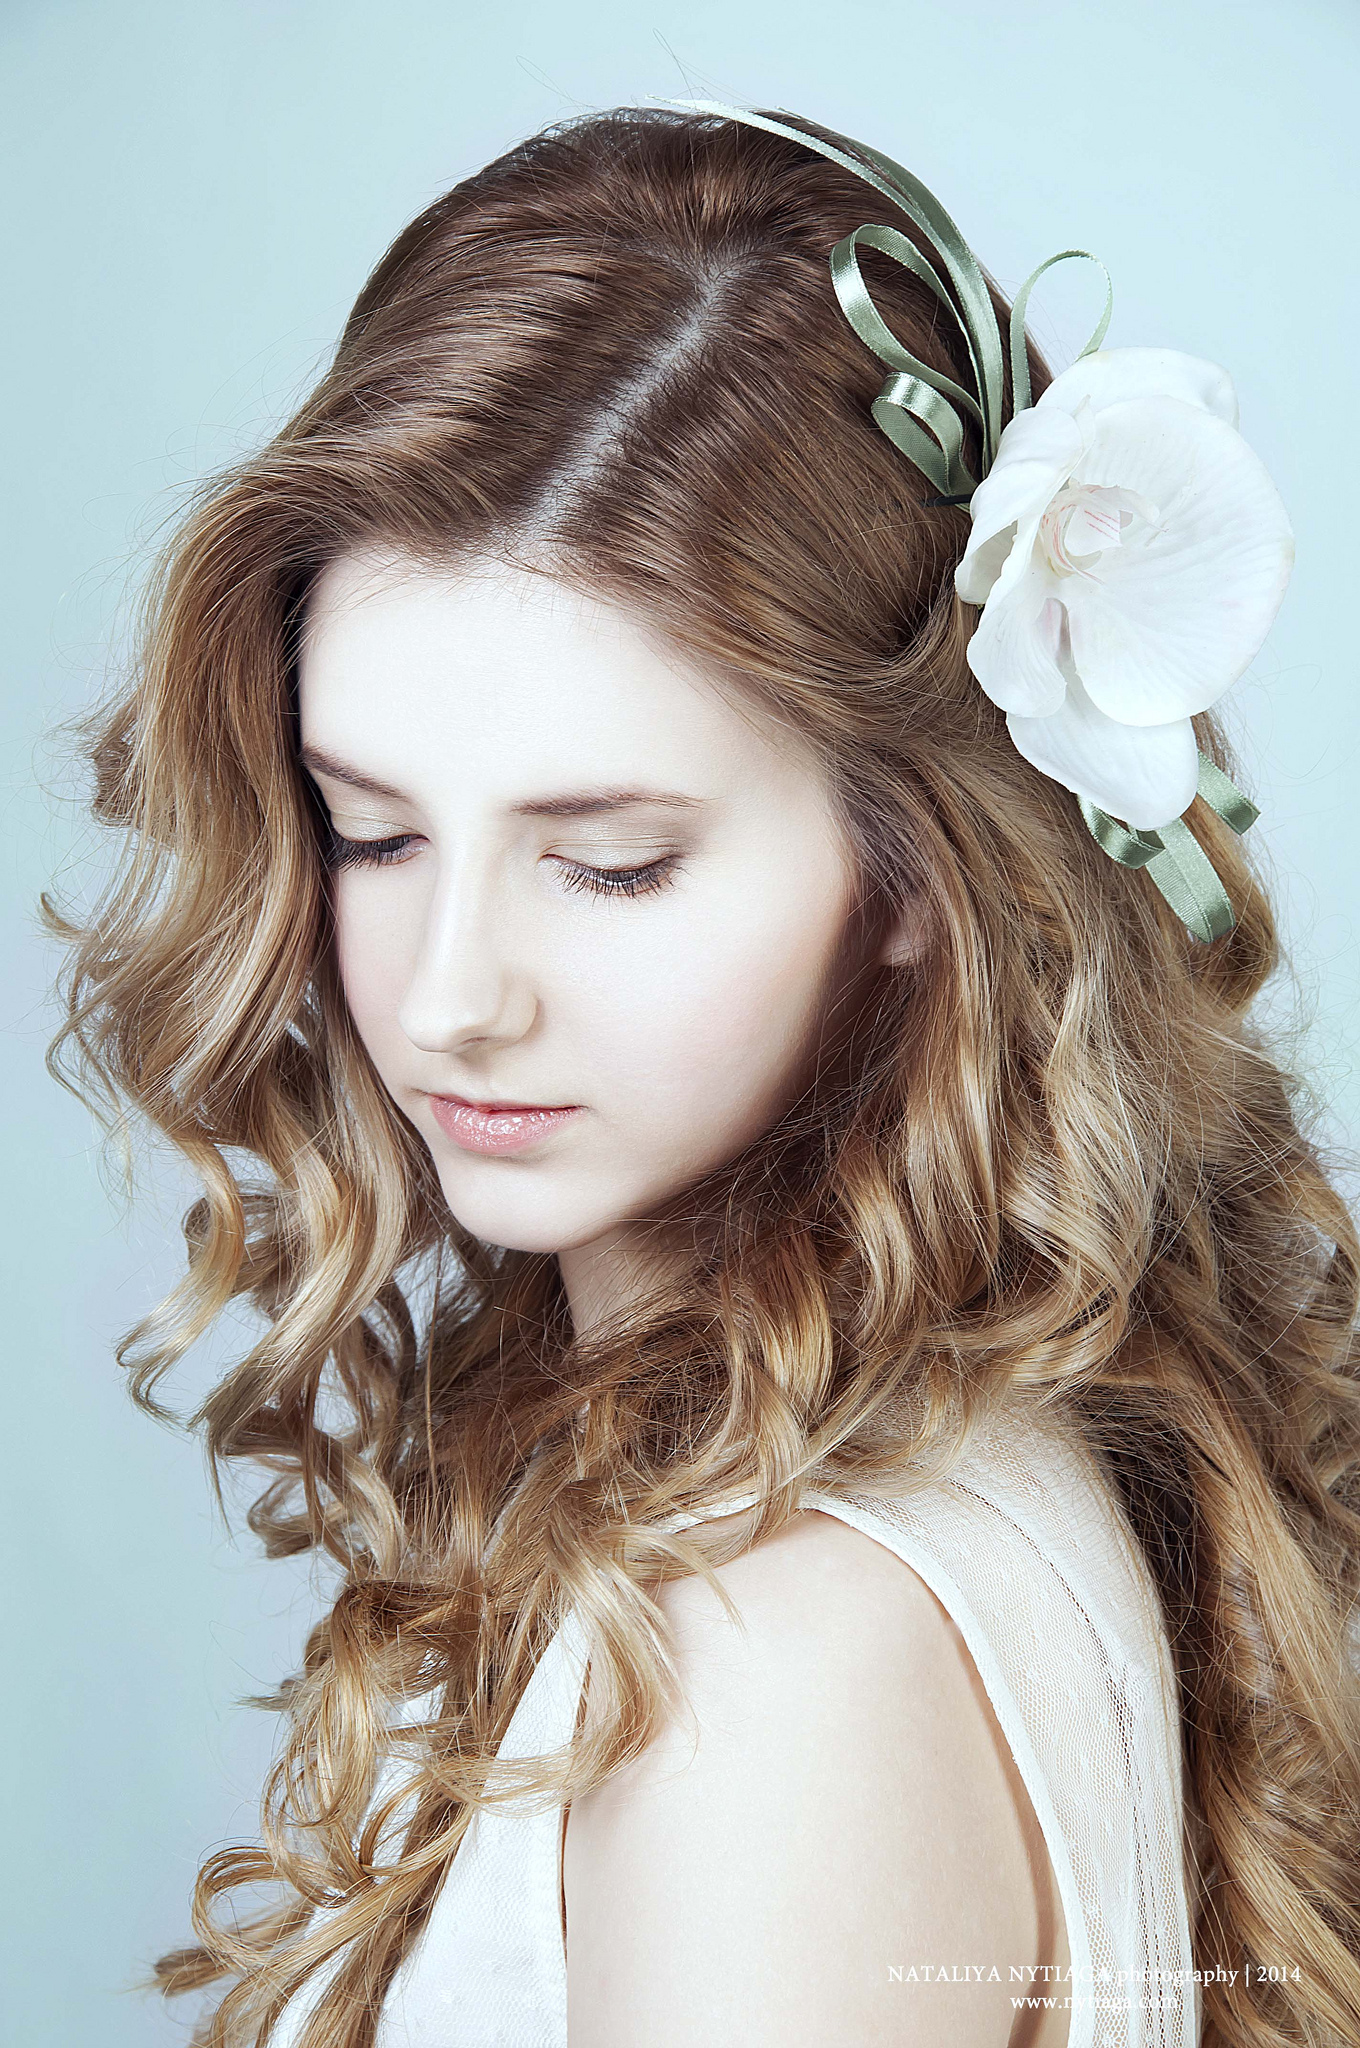 Romantic young woman with long curly blond hair